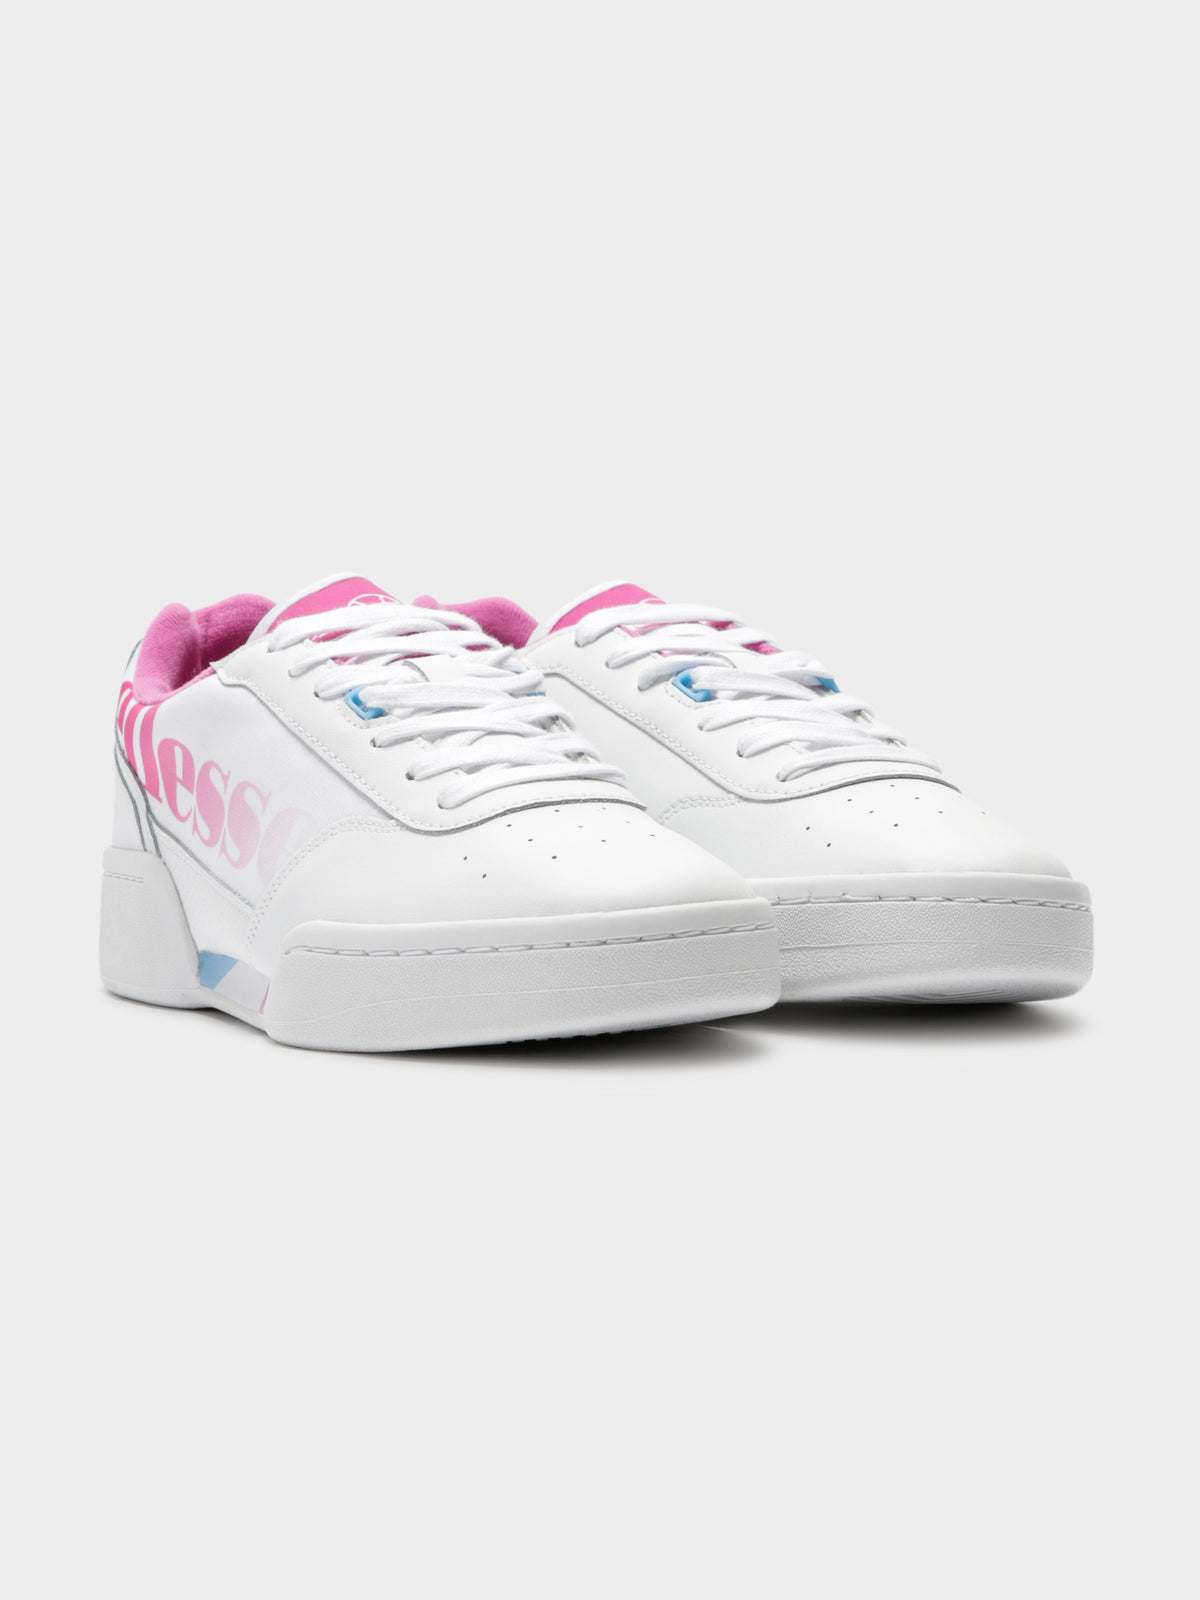 Womens Piacentino Sneakers in White and Pink